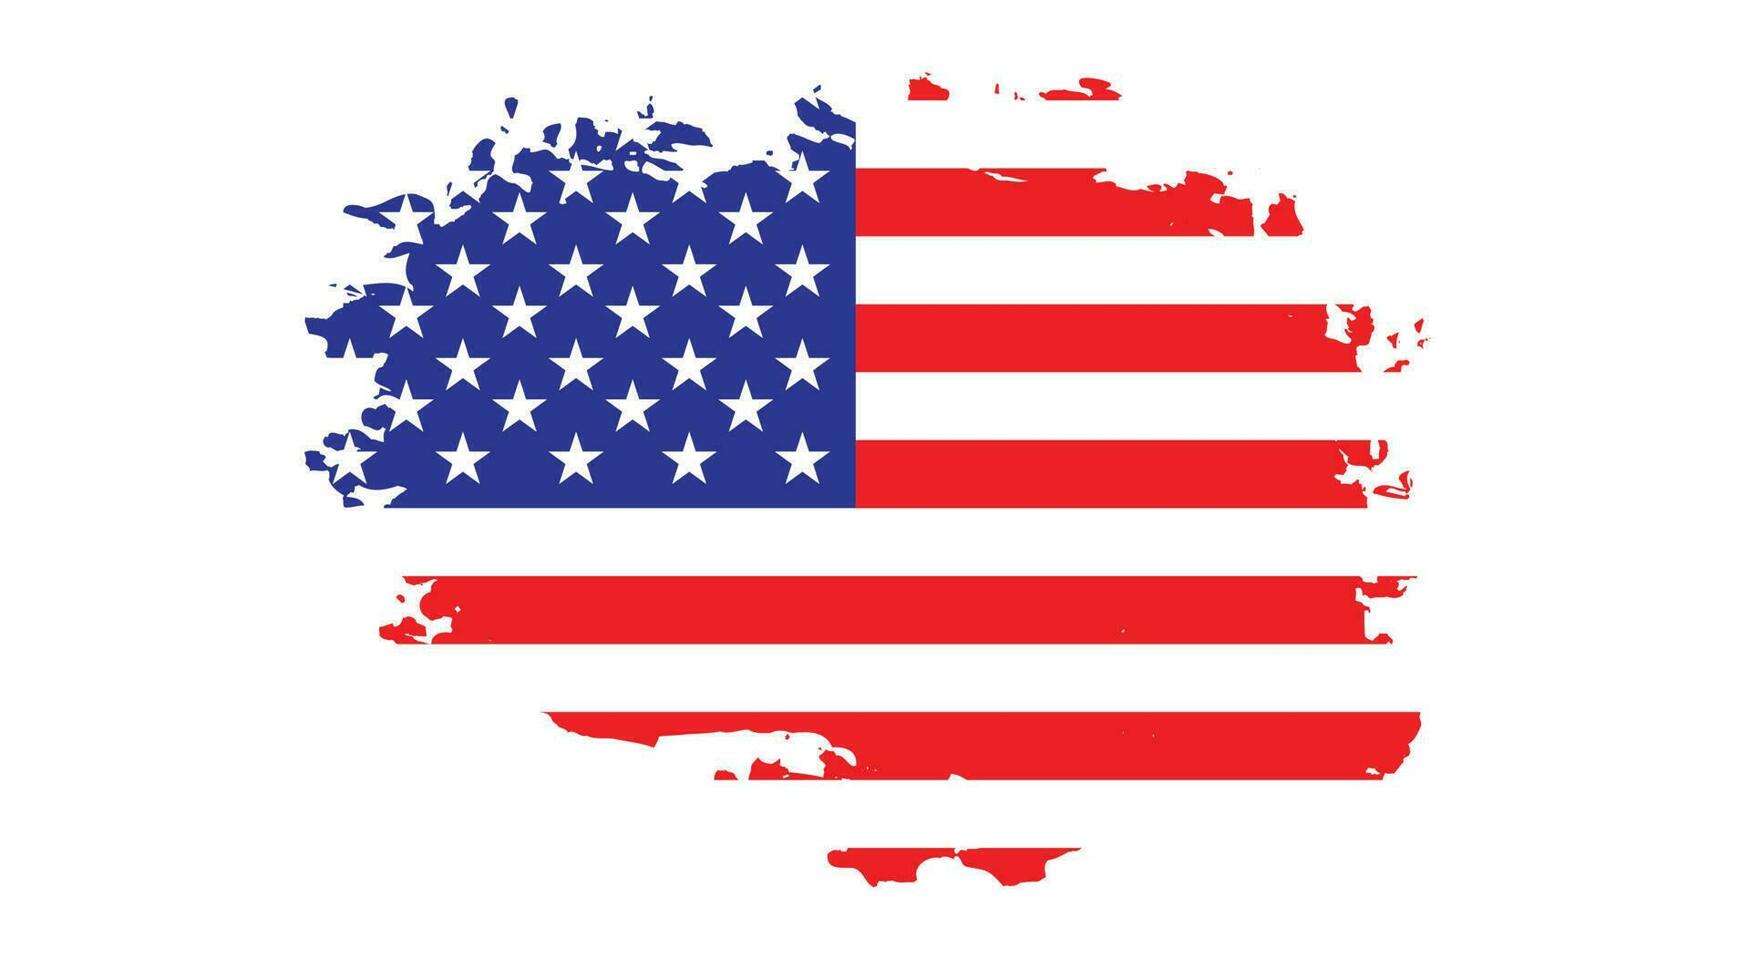 New USA faded grunge flag vector